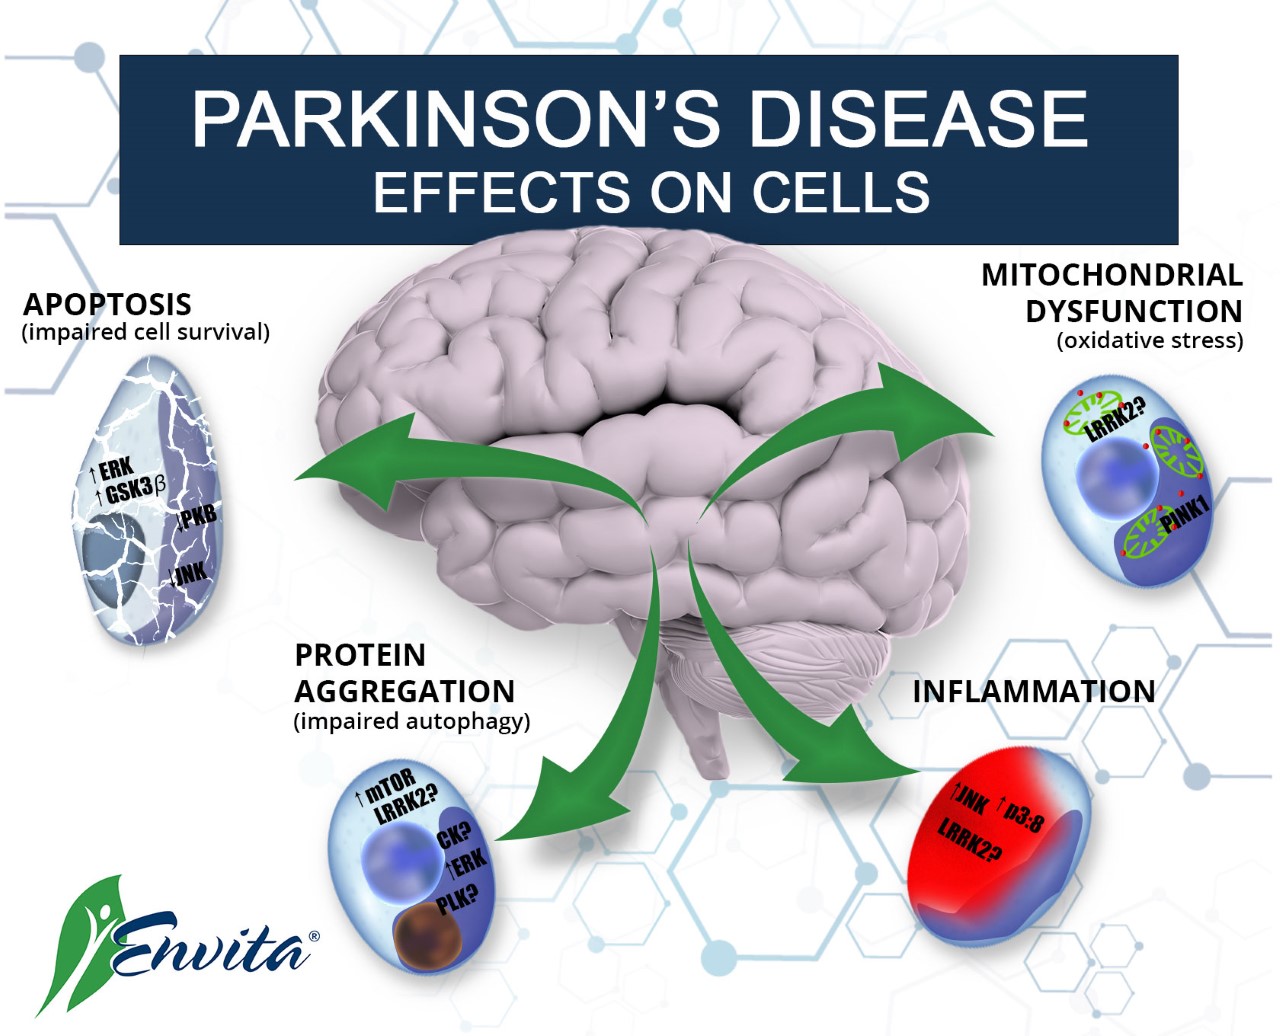 A graphical depiction of Parkinson's Disease effects on cells